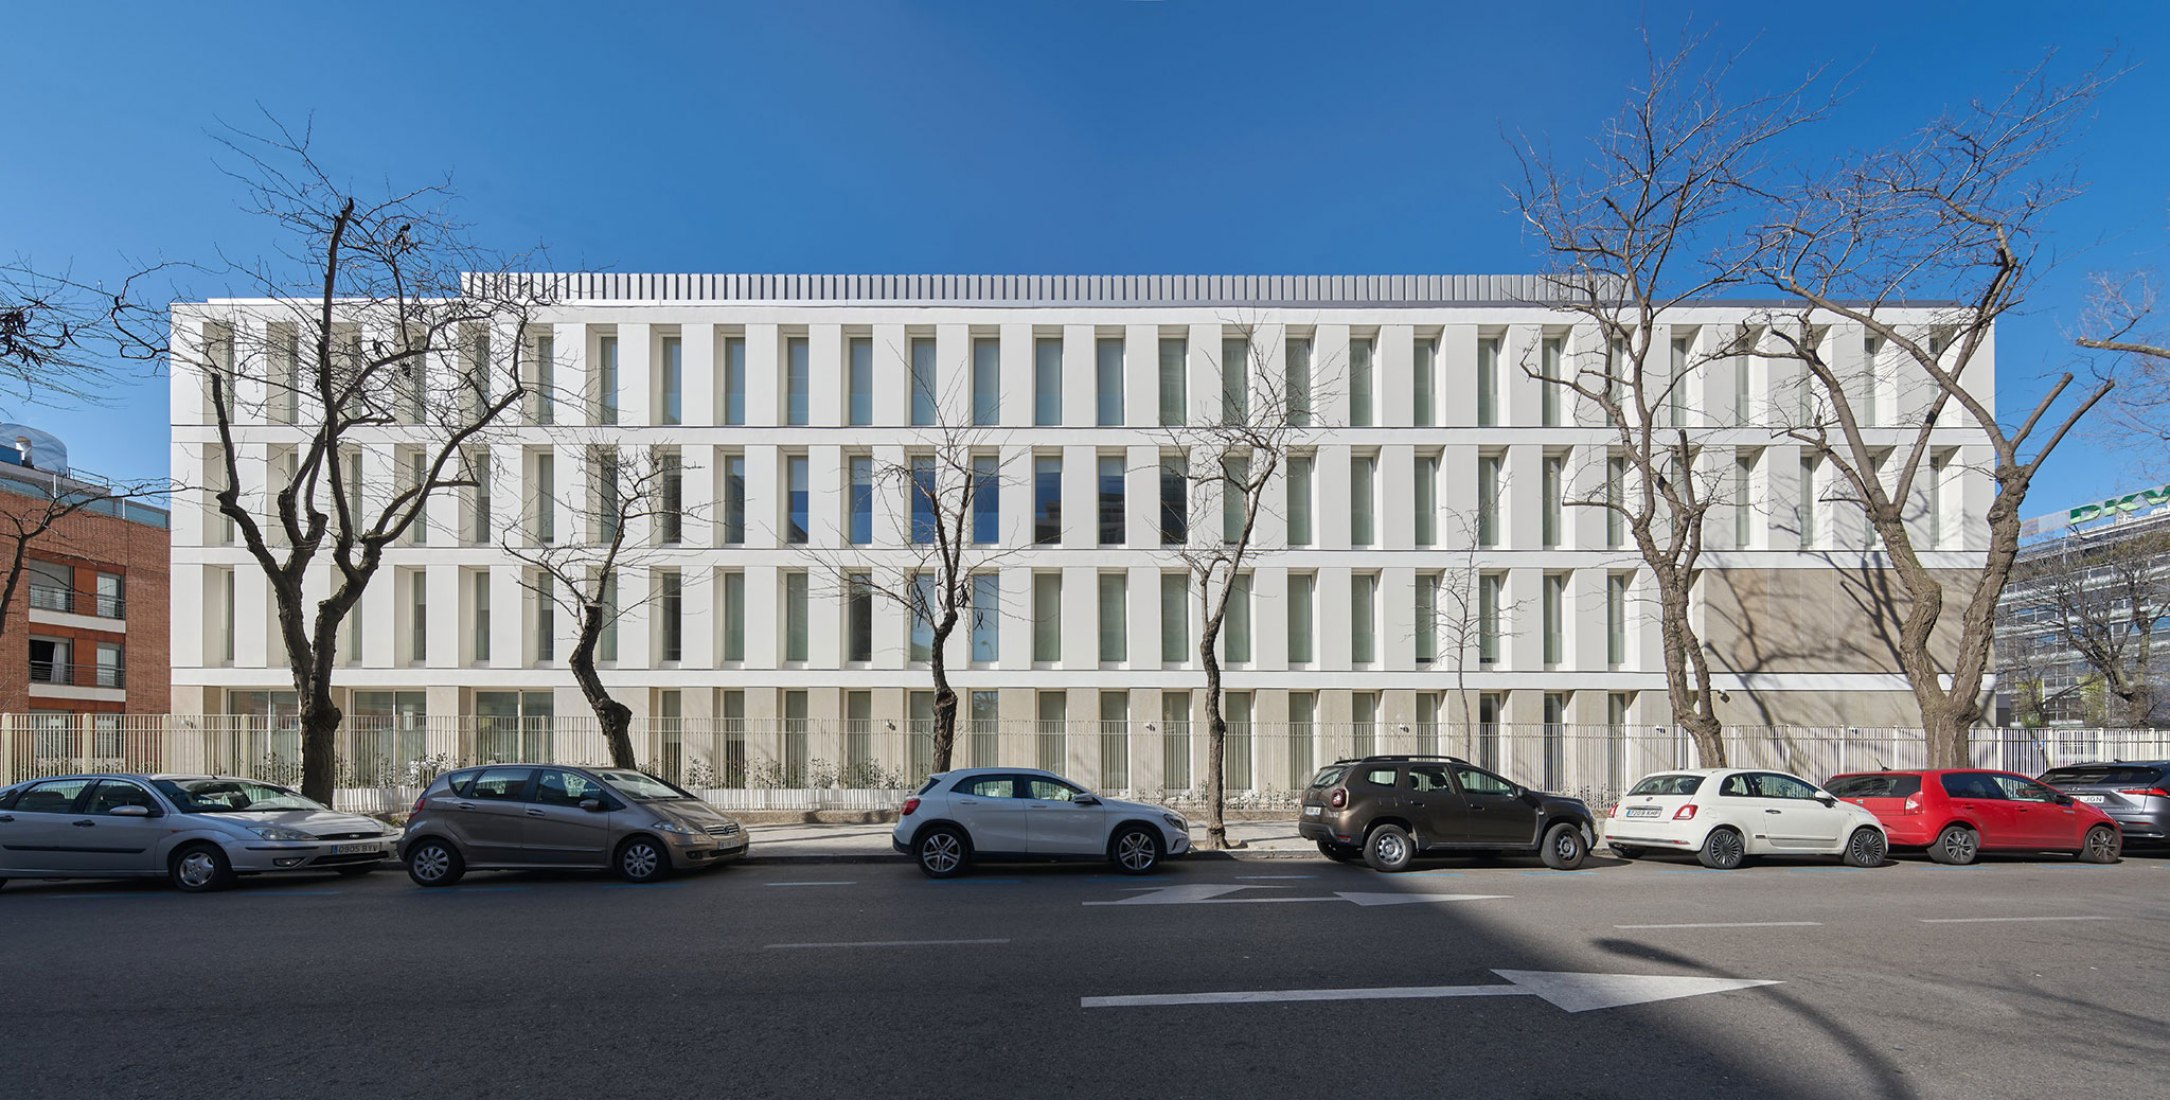 Educational and administrative centre by Riaño Arquitectos. Photograph by Alfonso Quiroga.